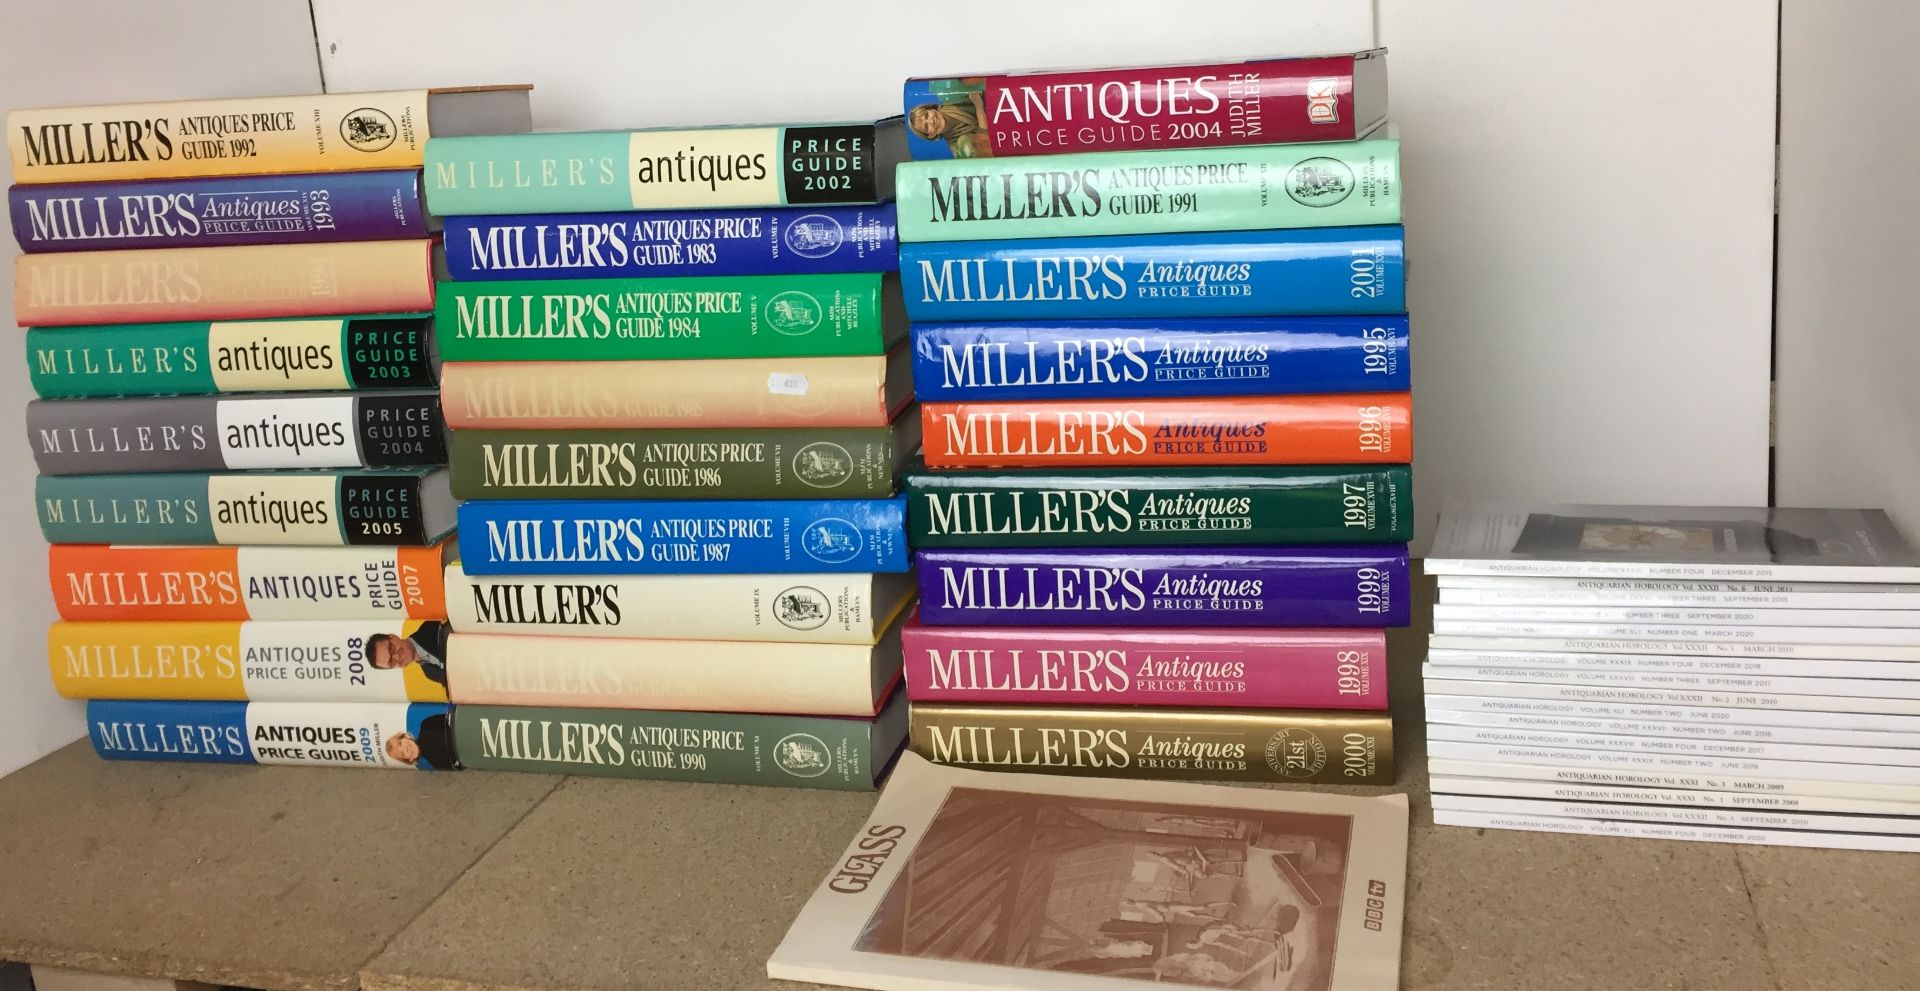 Forty-five books including Miller's Antiques guides,